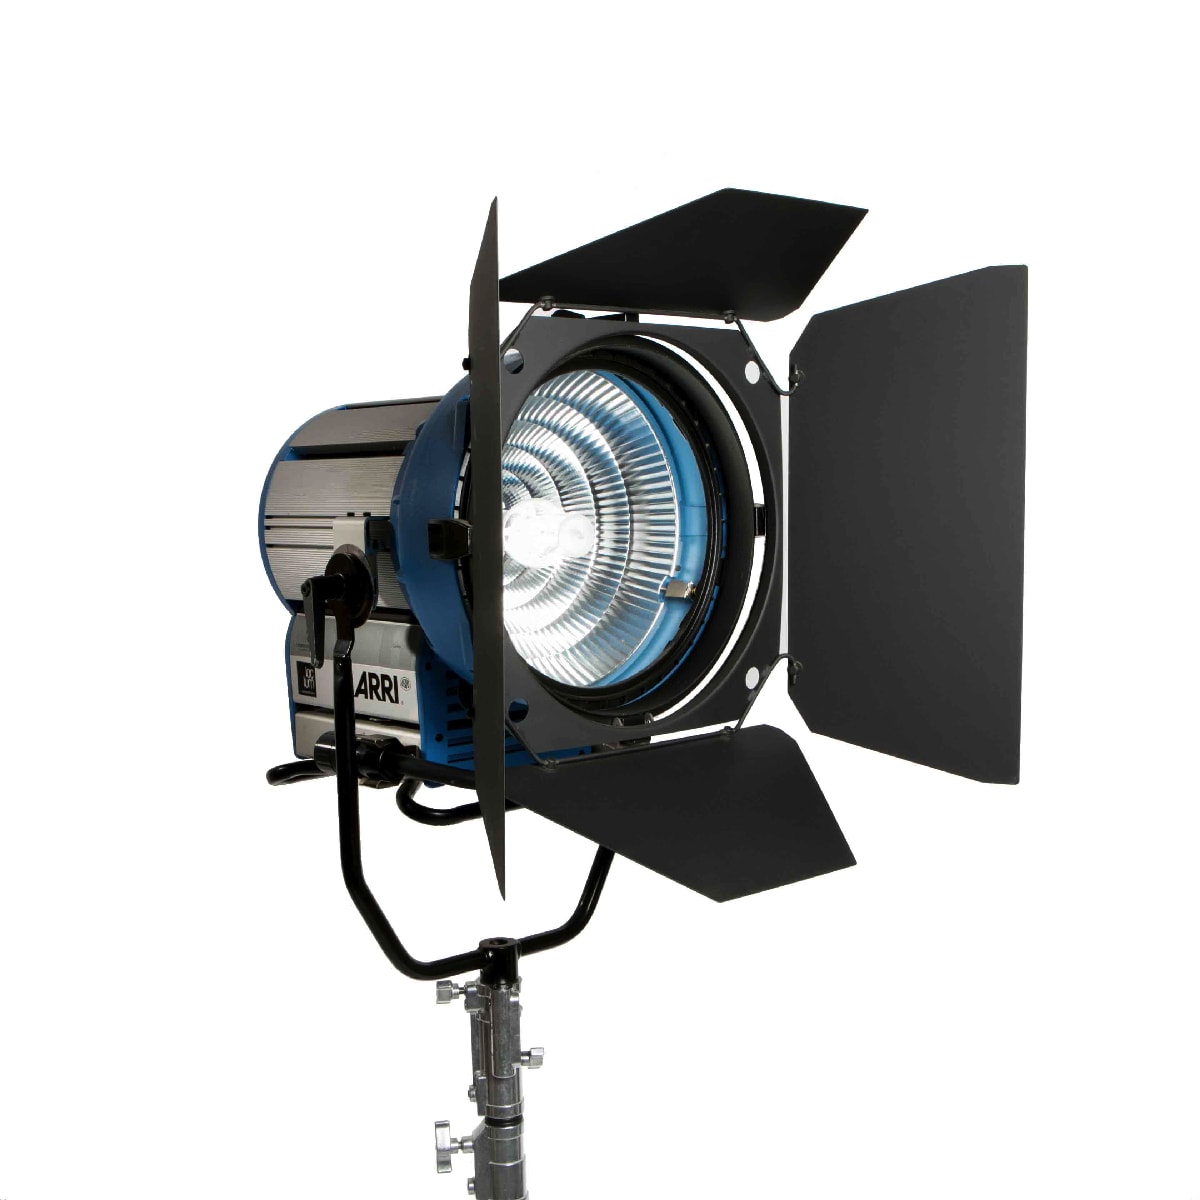 ARRI M90 Open Face with Facetted Reflector